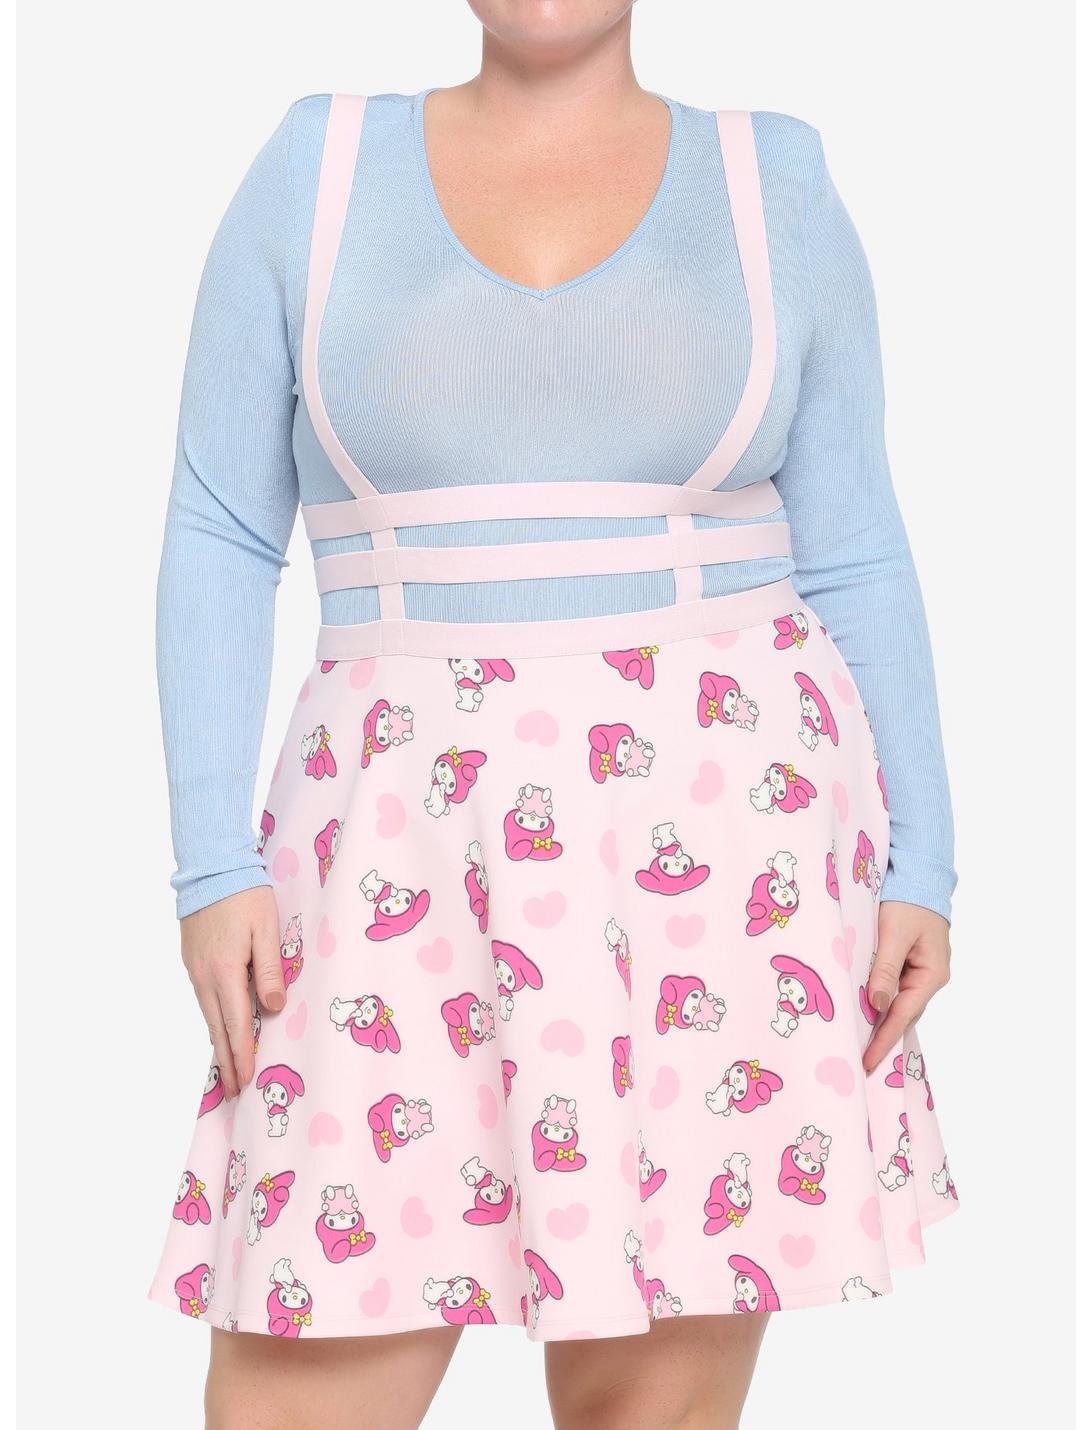 My Melody Strappy Suspender Skirt Plus Size, MULTI, hi-res